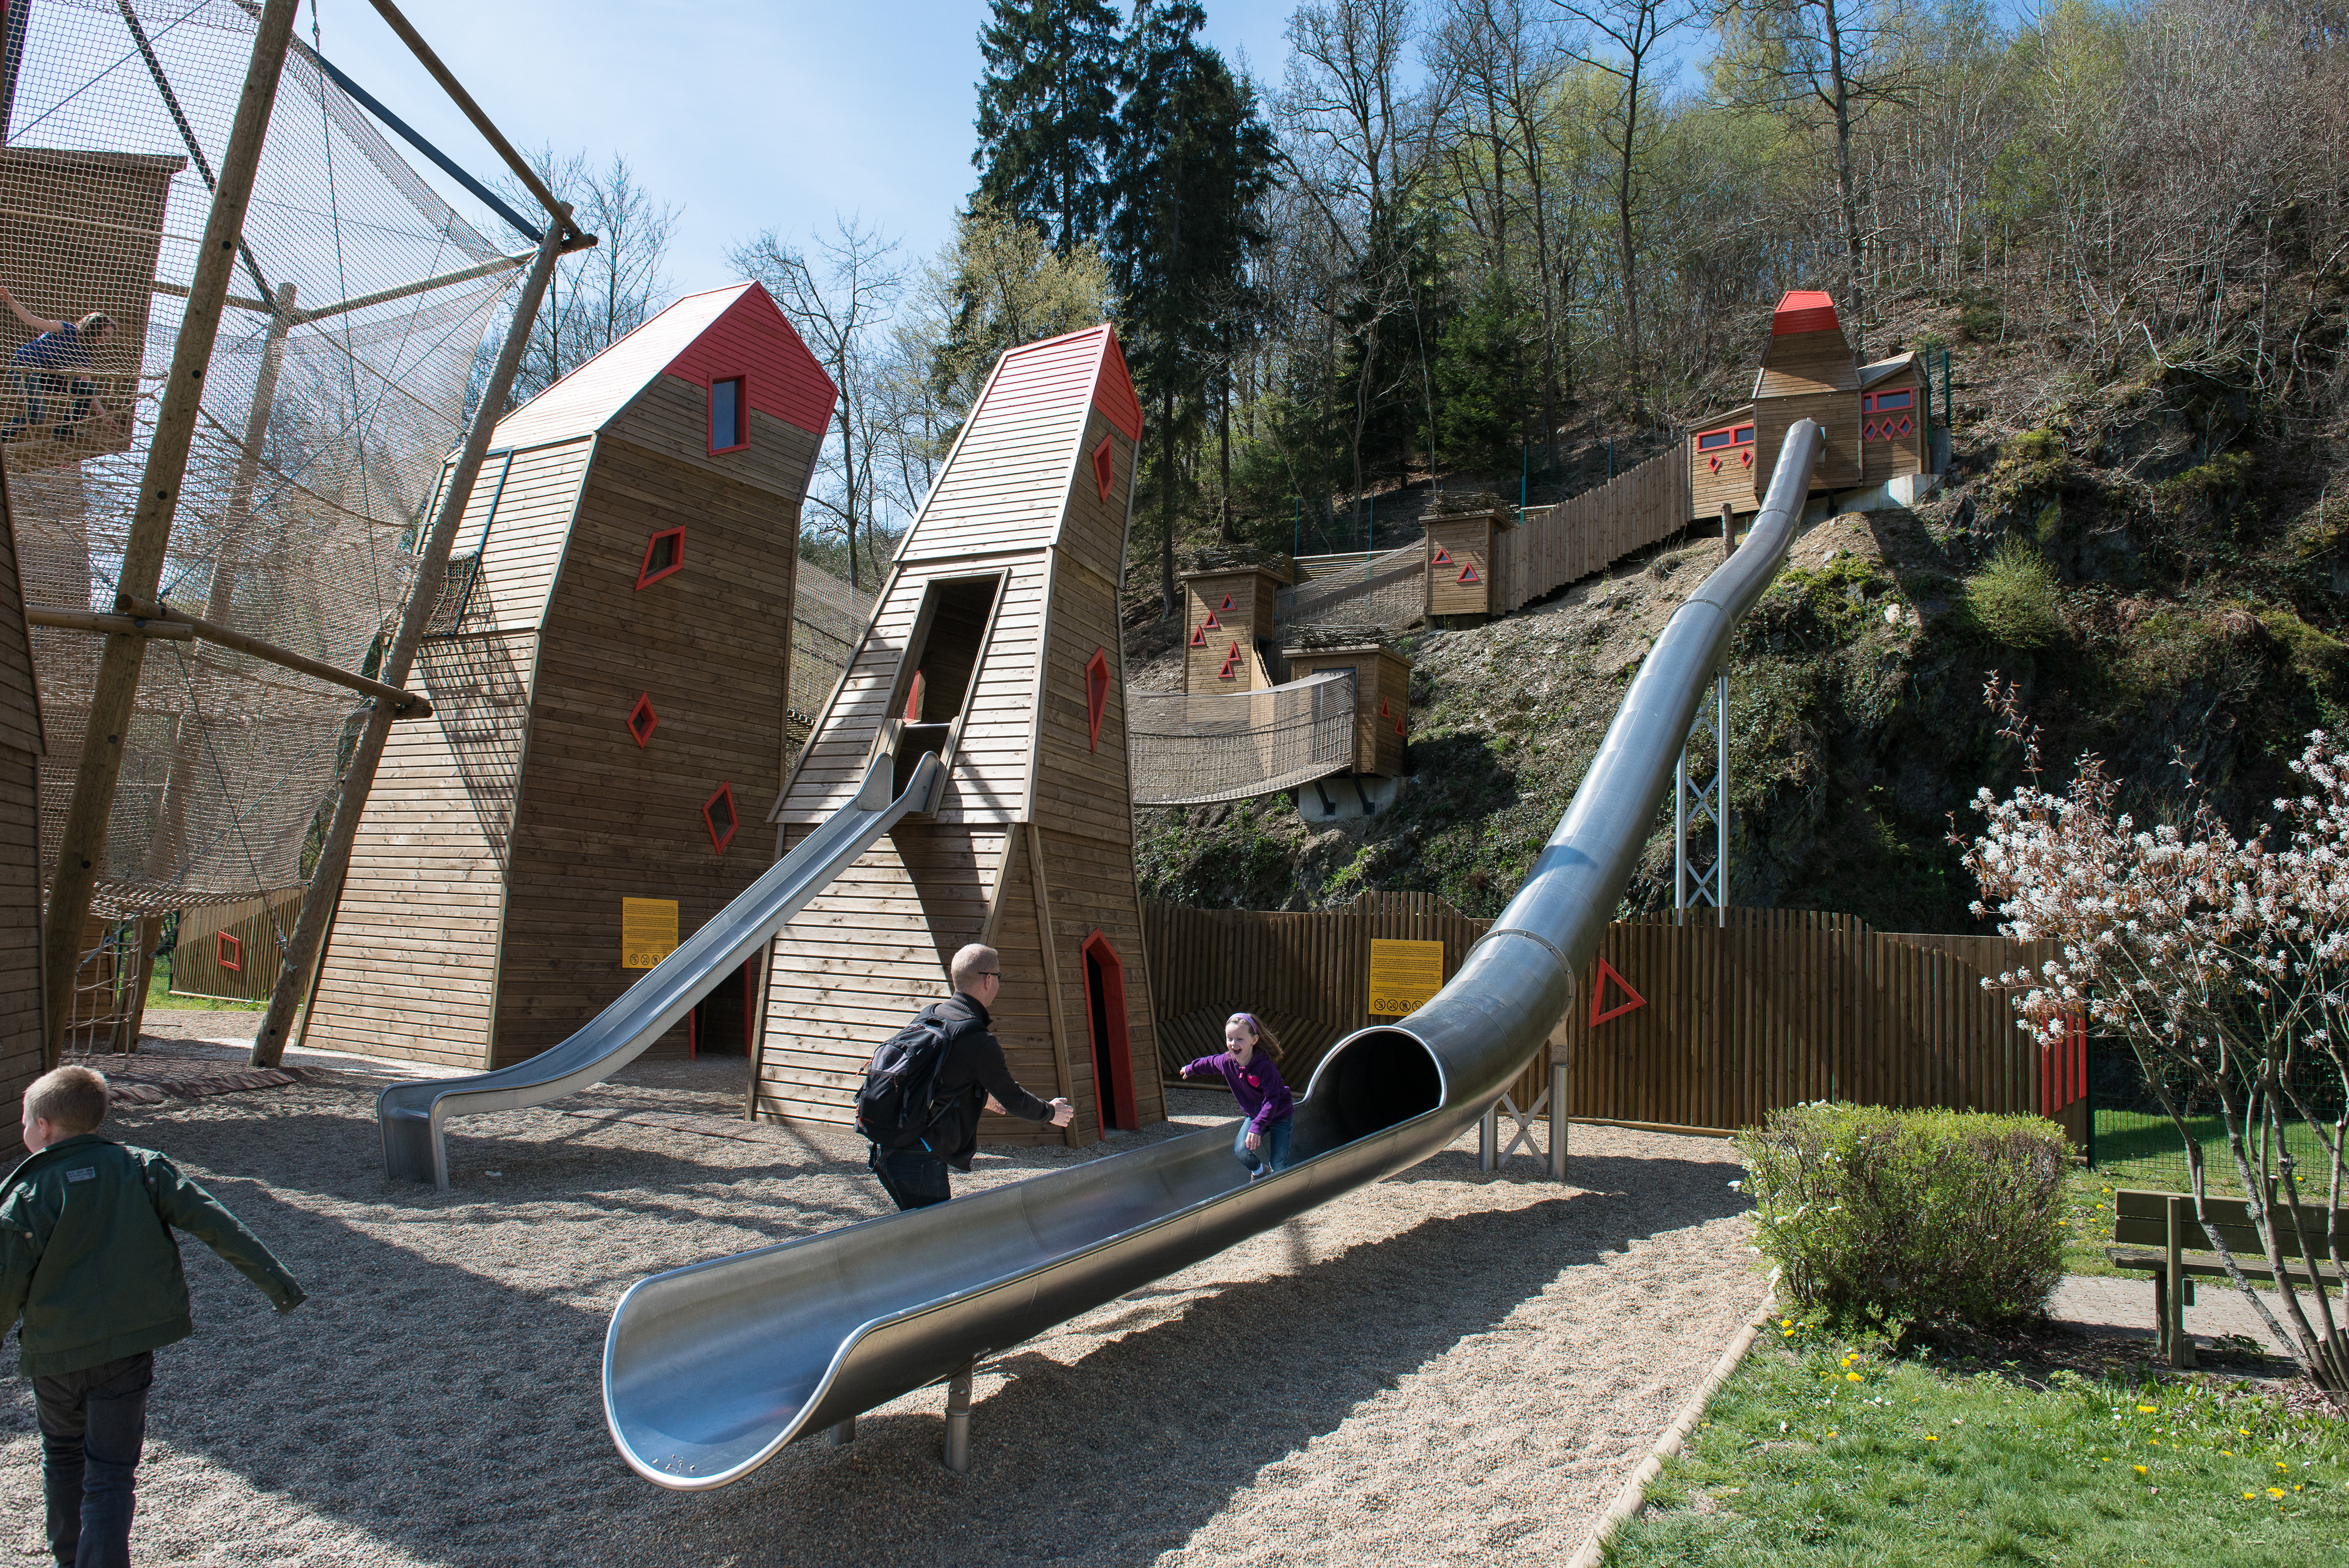 Houtopia, a recreative centre promoting children's rights in Houffalize 